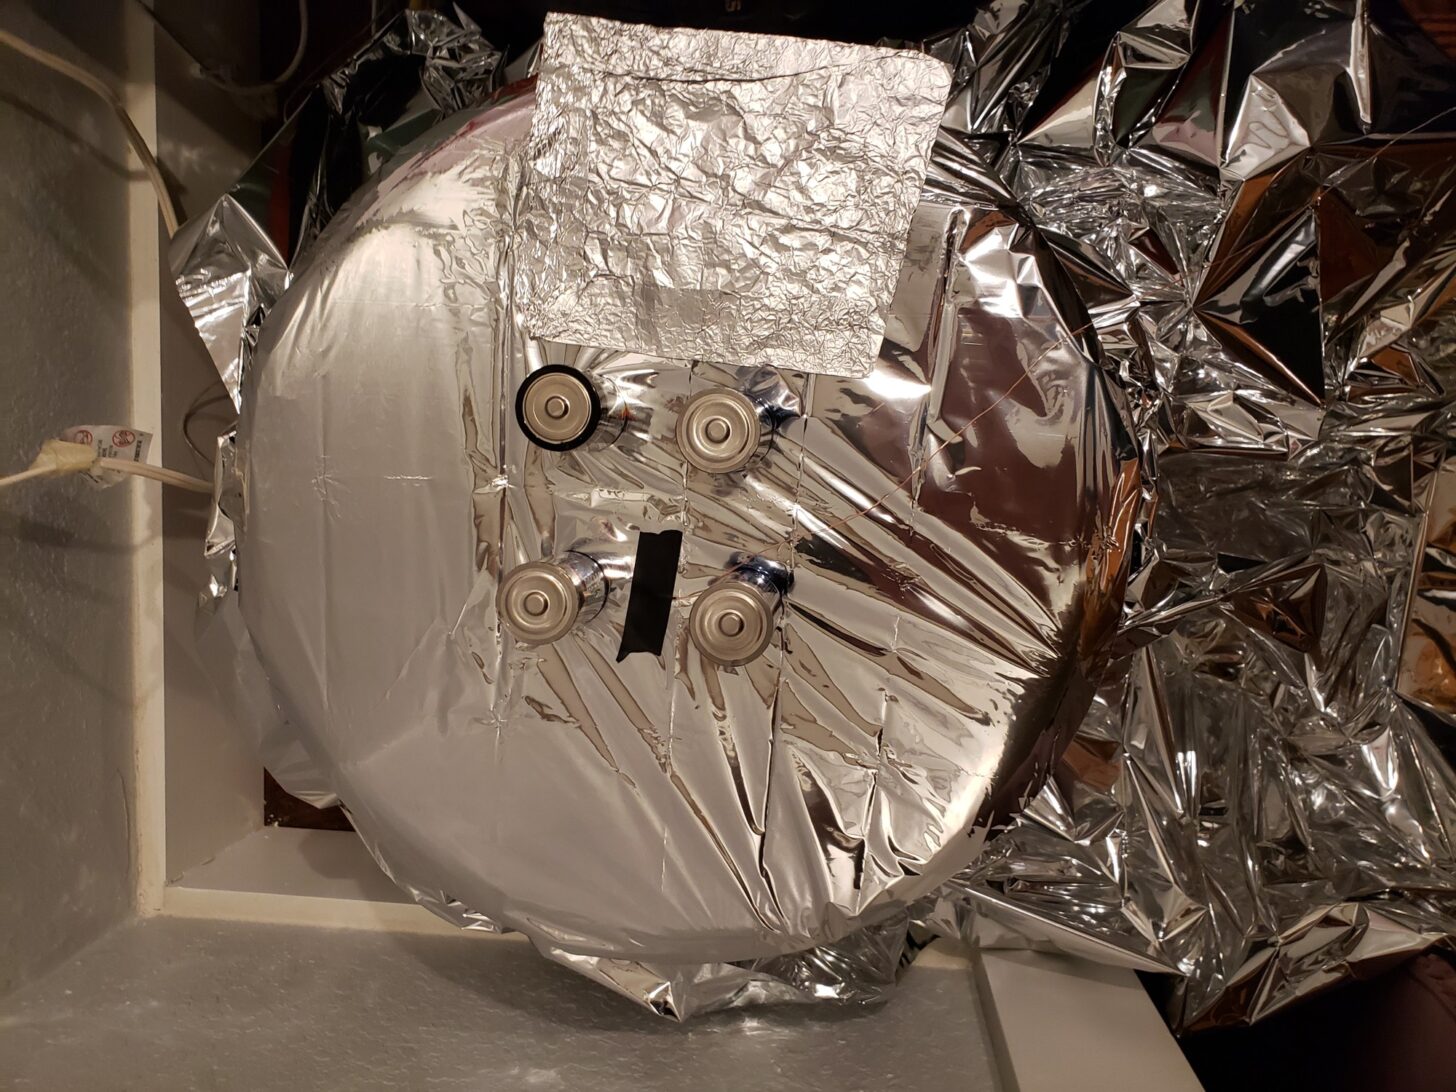 A space blanket stretched over a device for measuring heat reflectivity.